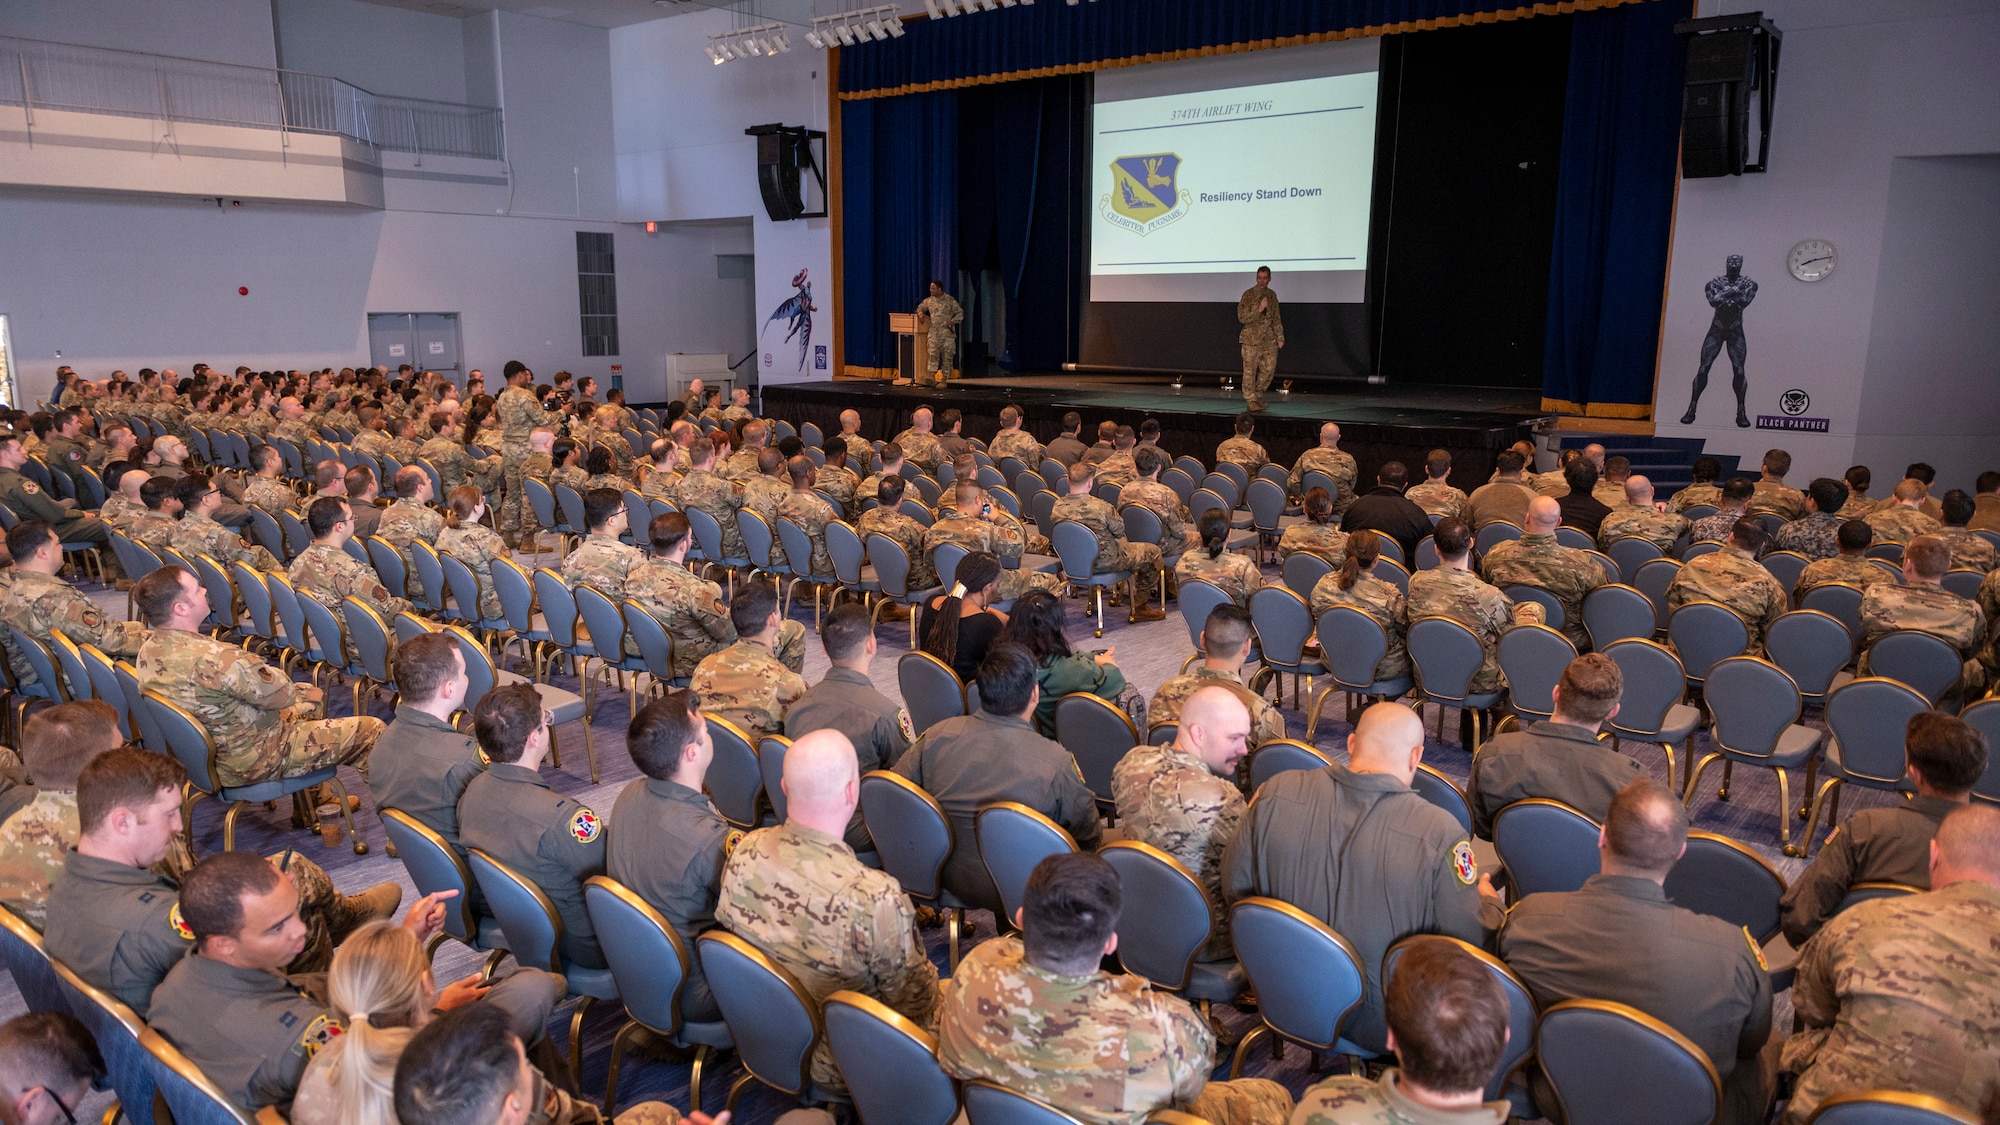 Hundreds of airmen watch presenters on a stage